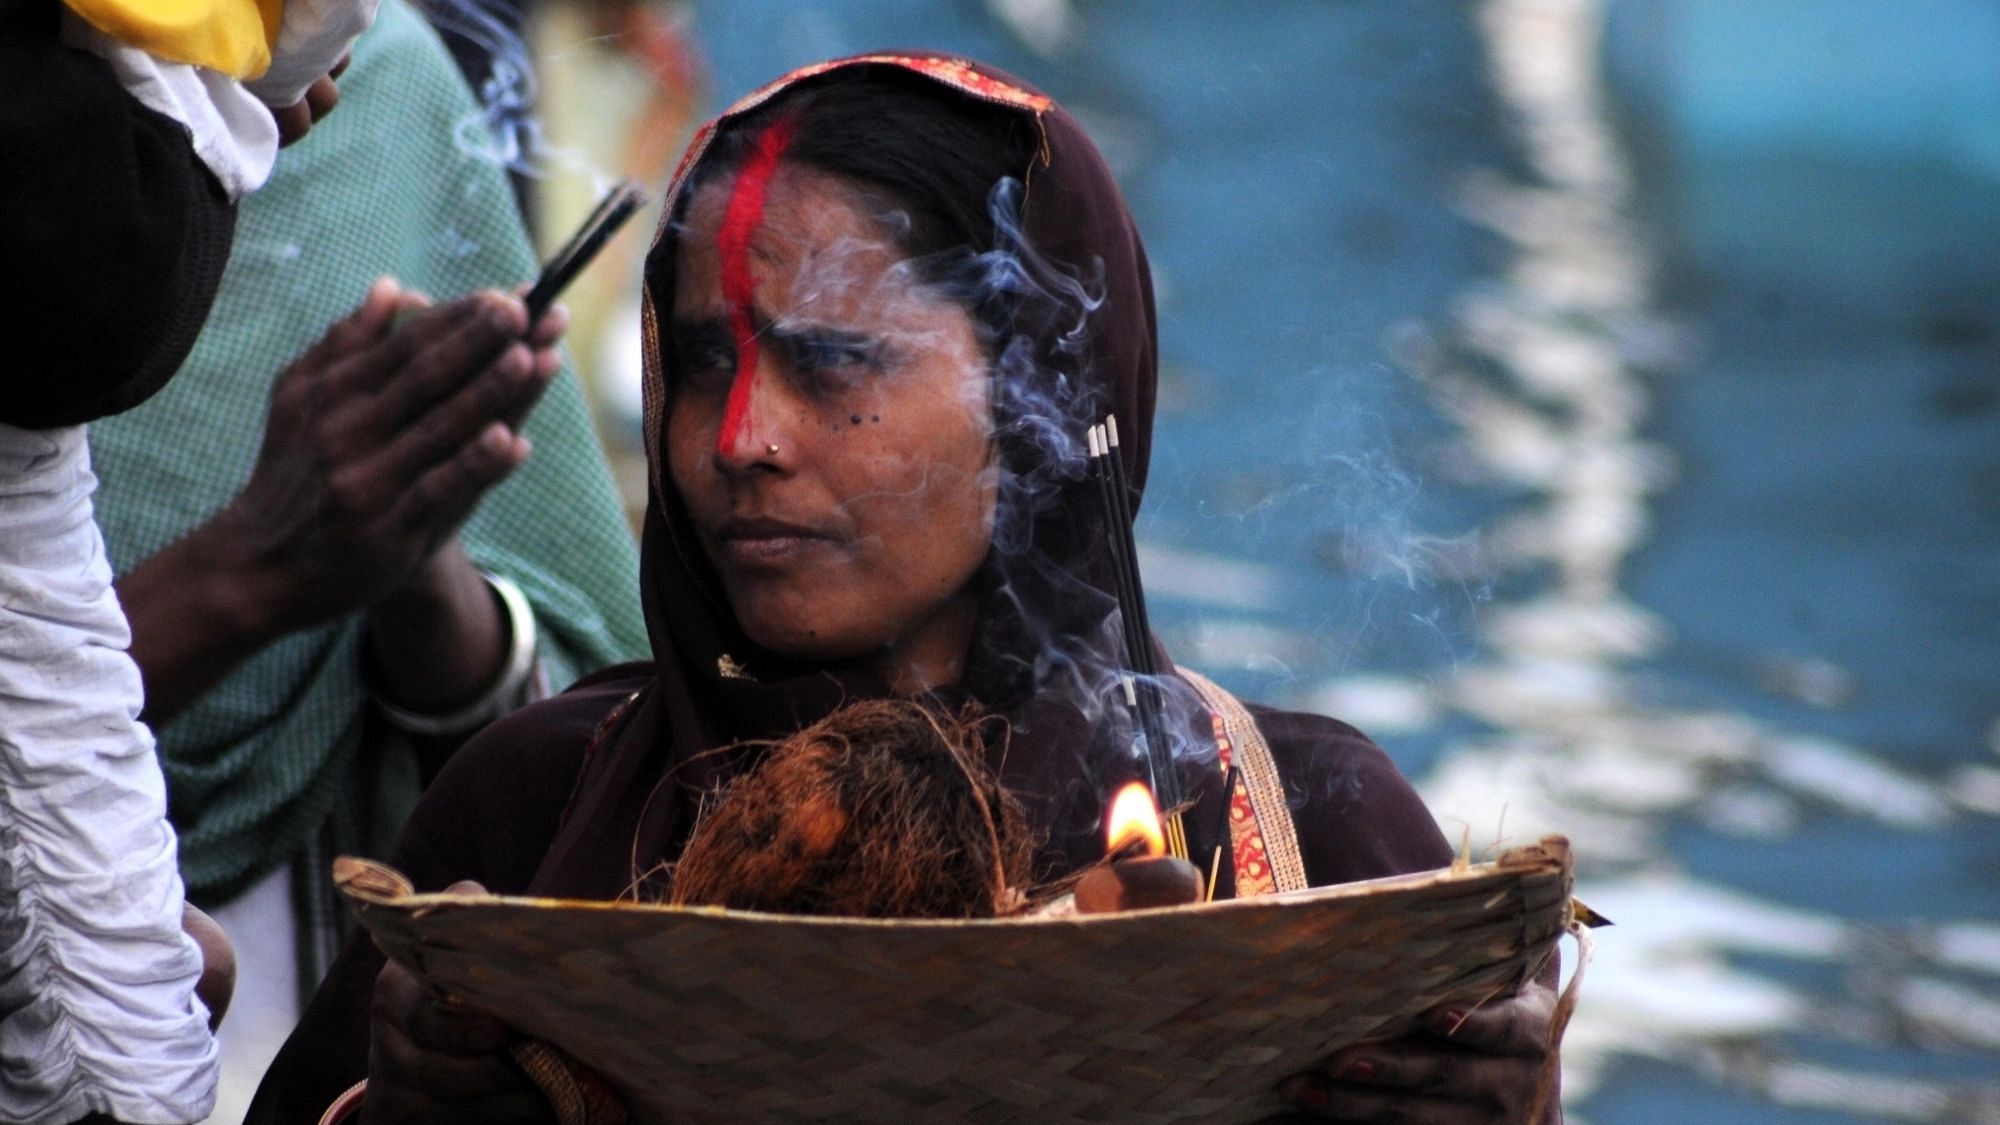 Devotees perform rituals during Chhath Puja at Shri Durgiana Temple in Amritsar. 